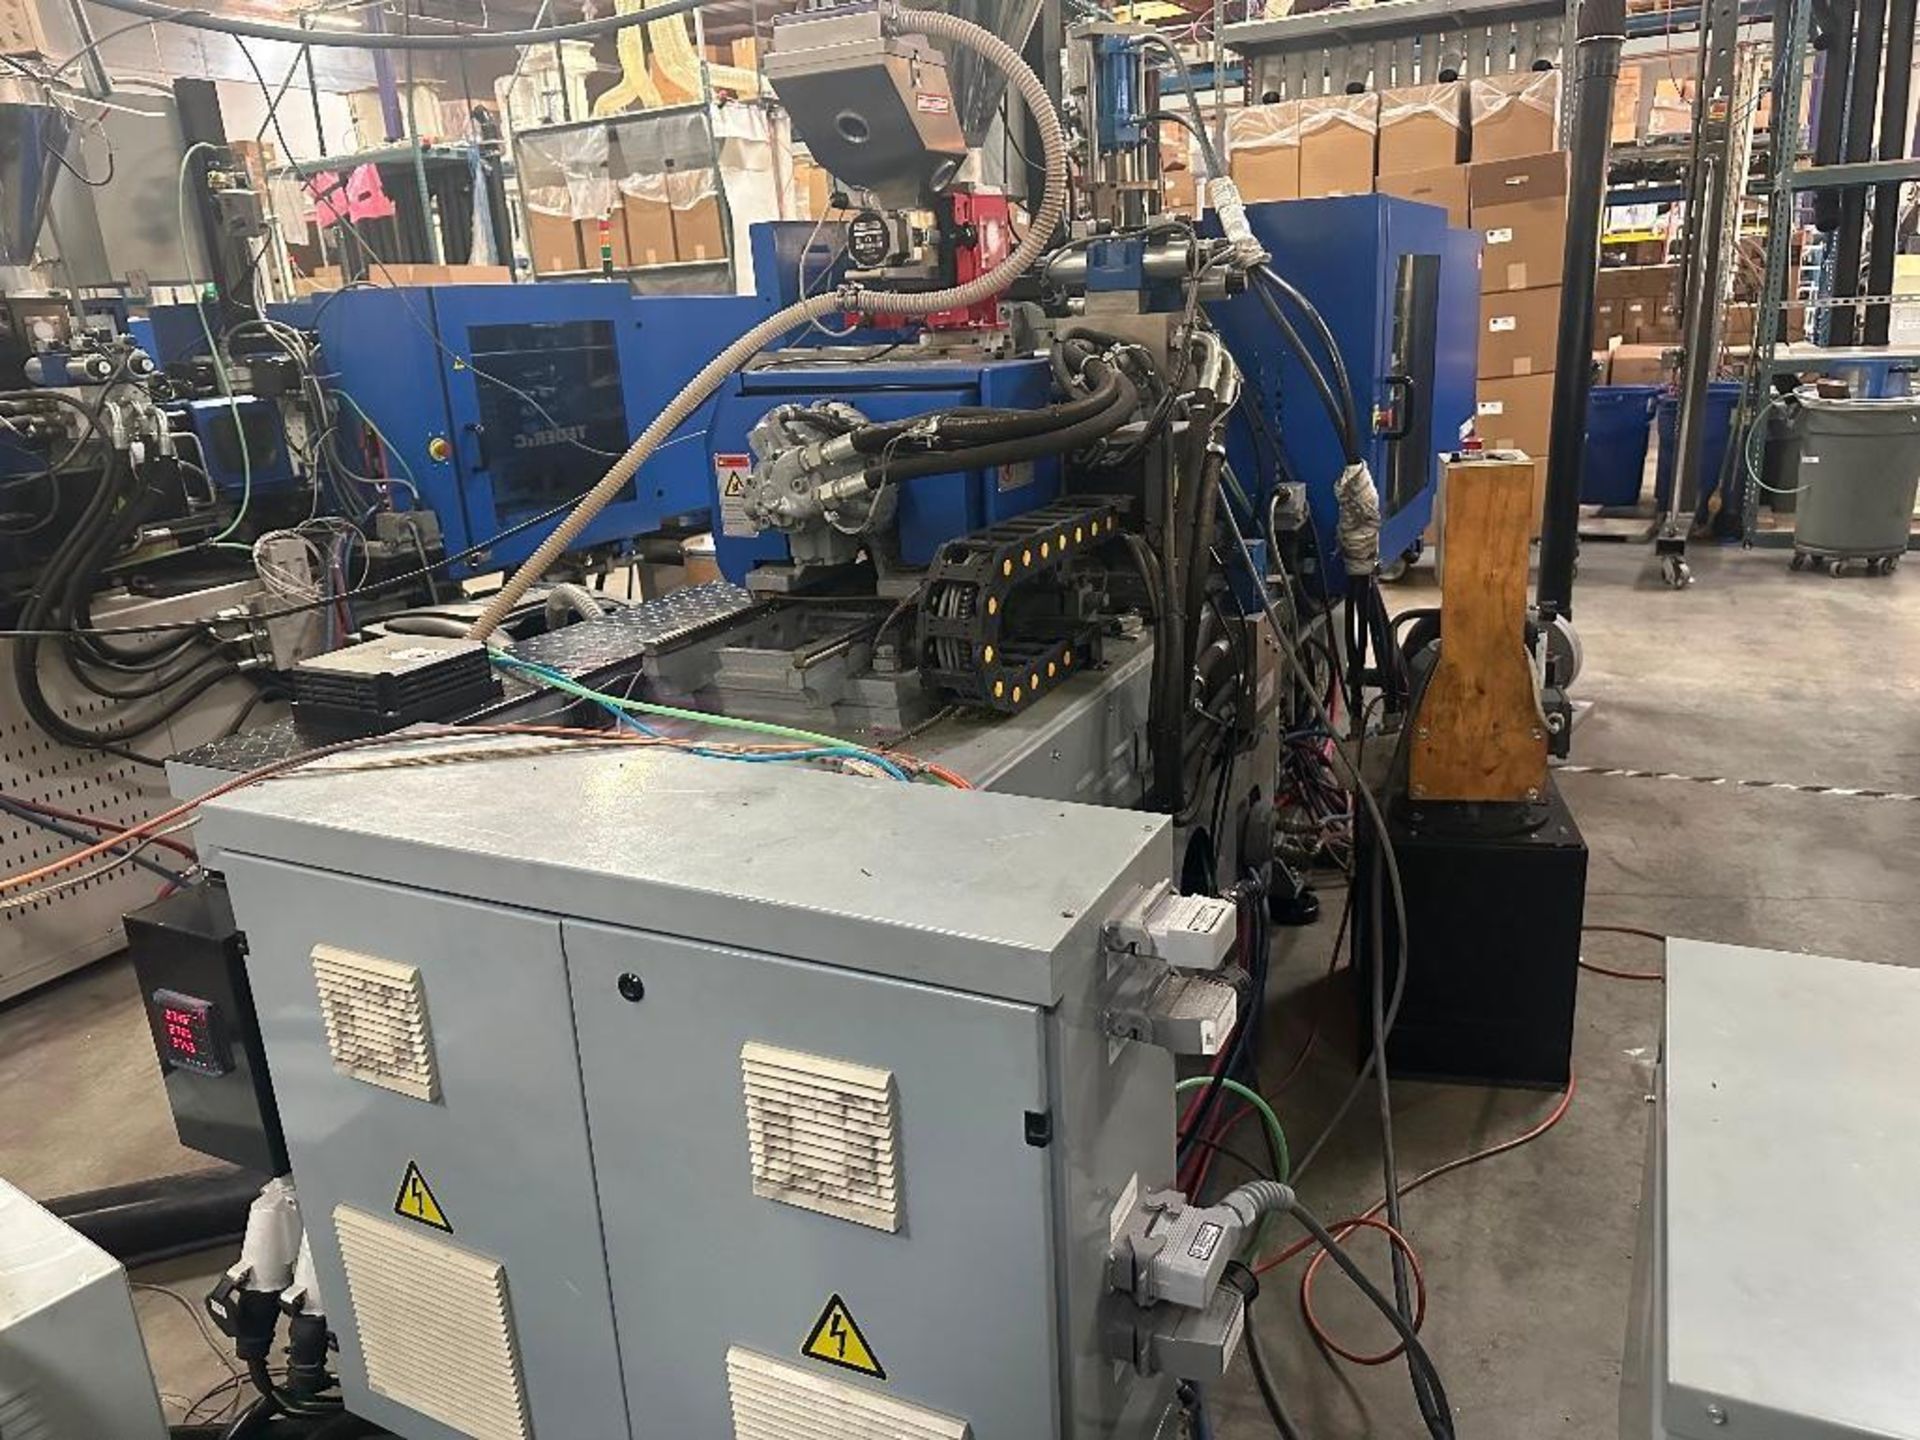 66 Ton Tederic D60 Plastic Injection Molder, Keba 12000 Control, s/n T3008-0200, New 2018 - Image 13 of 17